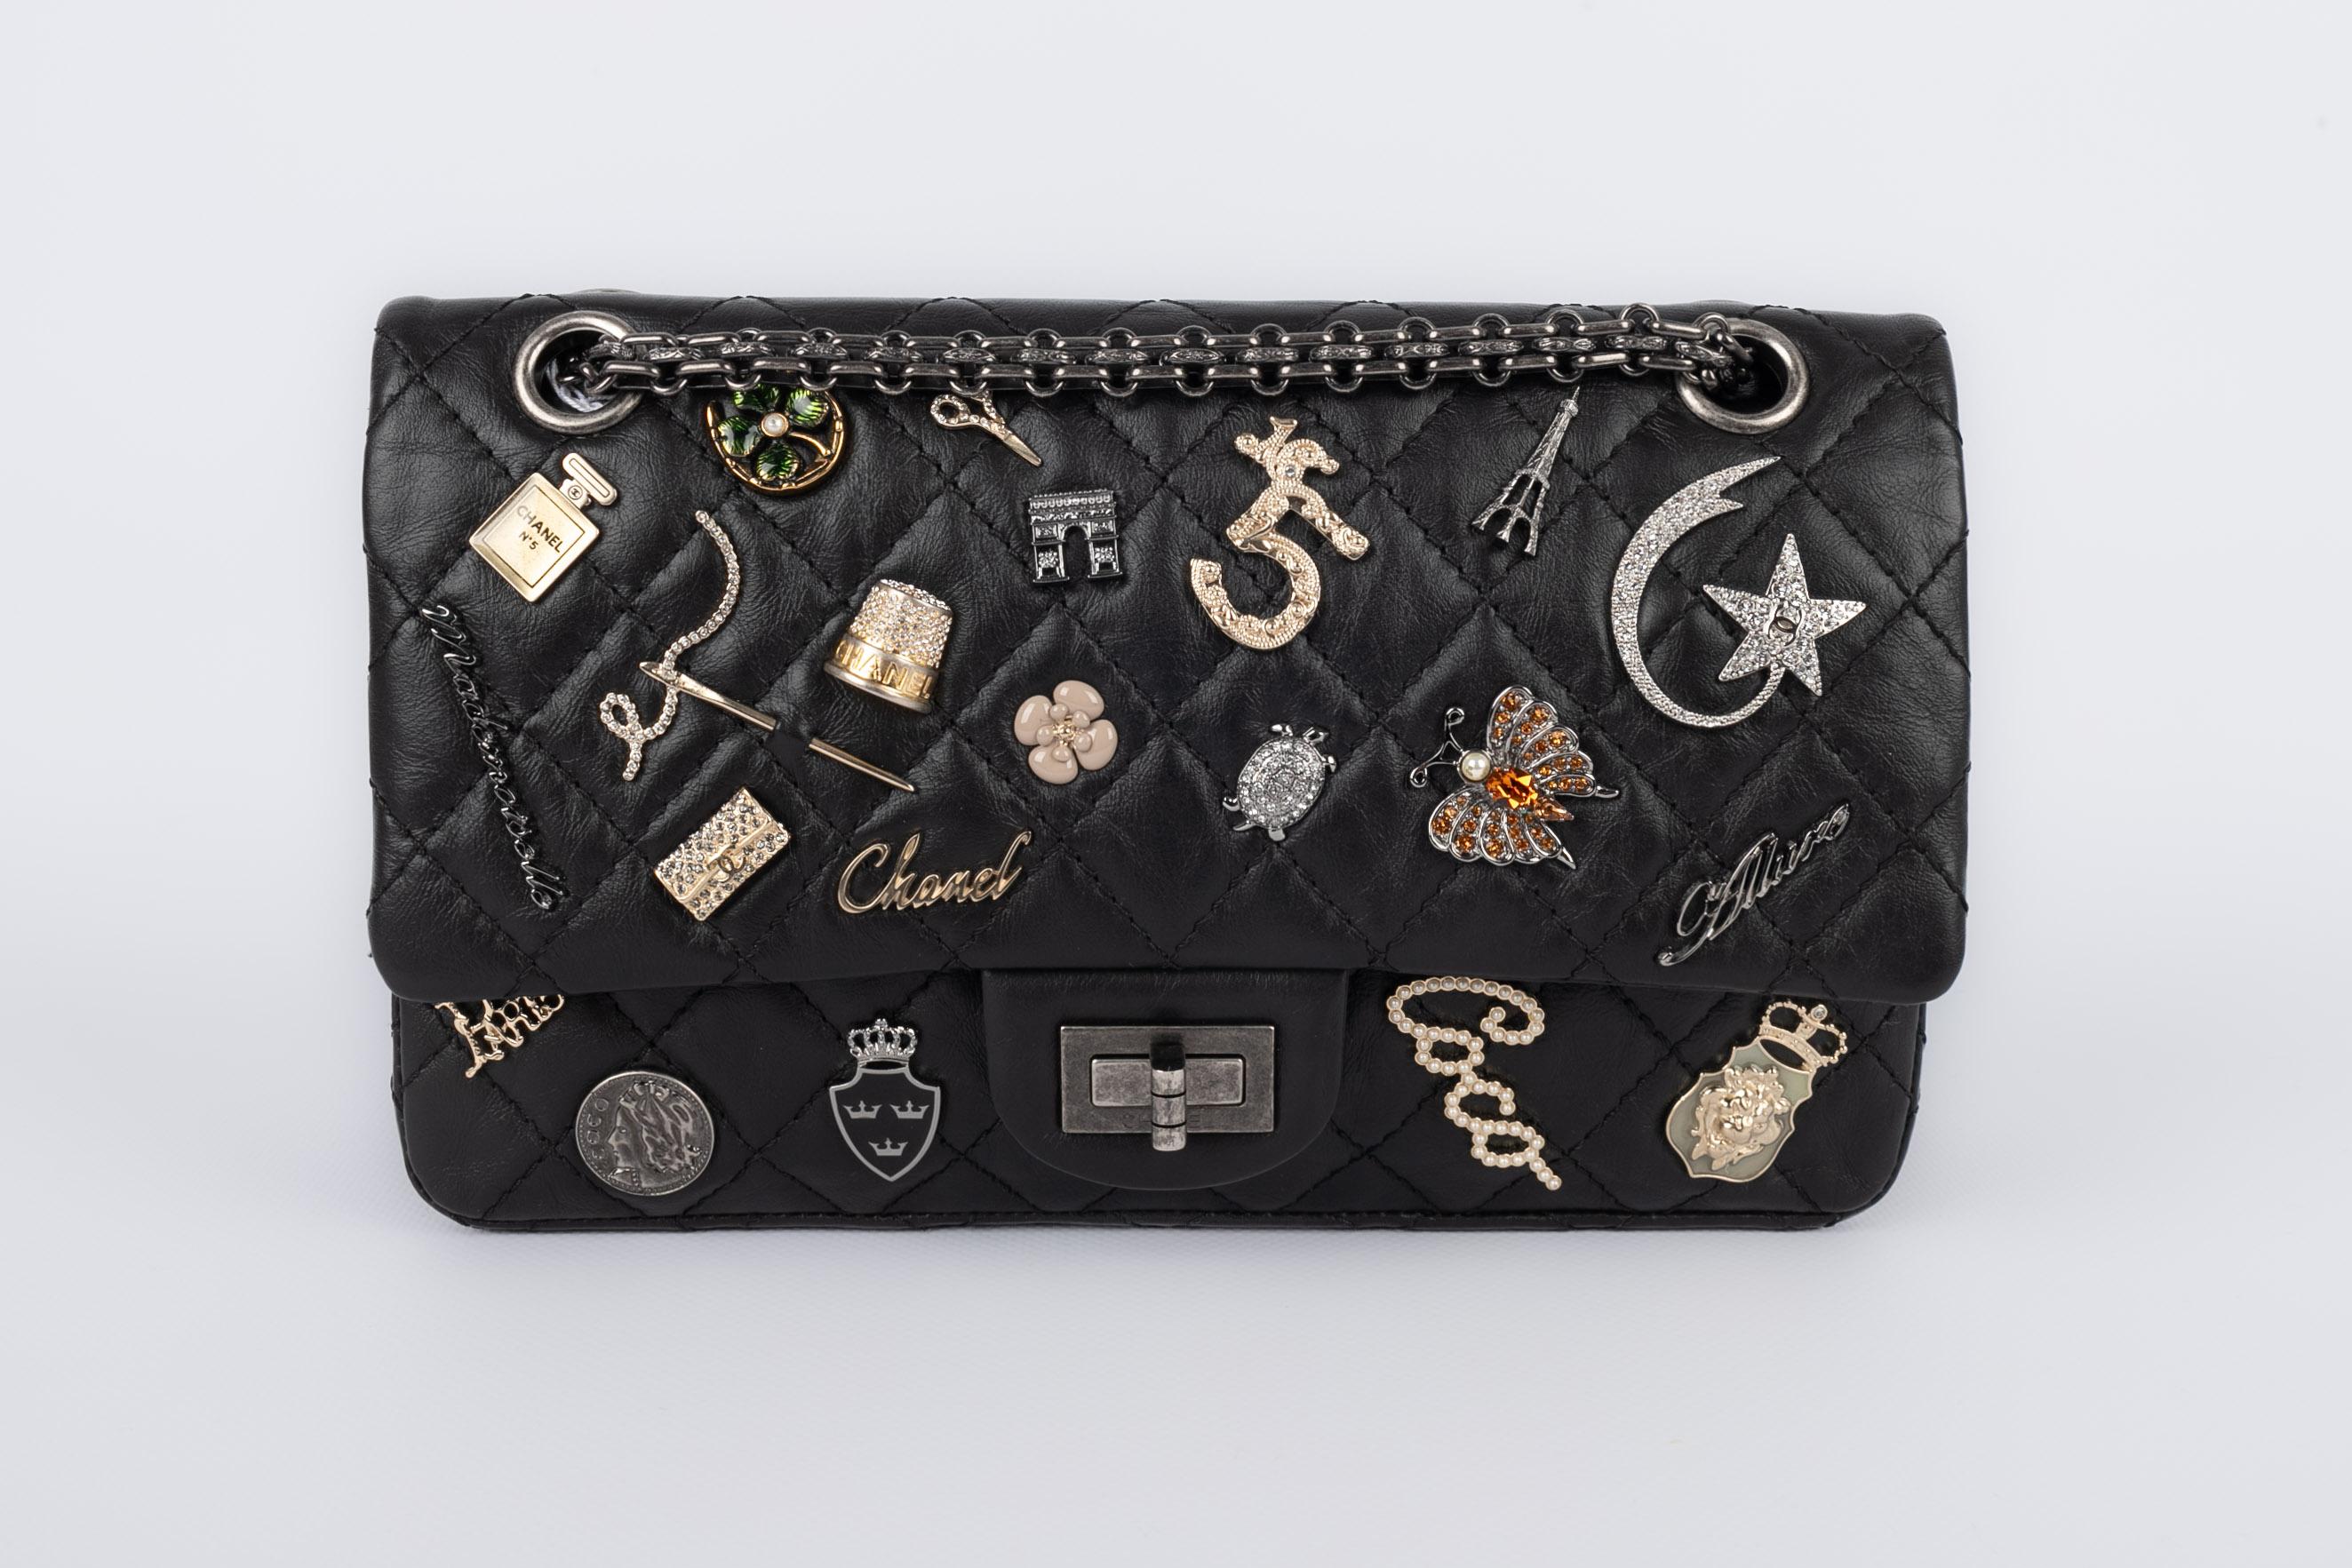 CHANEL - (Made in France) Black quilted leather 2.55 design bag enlivened with enamel and rhinestone ornamented metal charms. Dark-silvery metal elements. 2014/2015 Collection.

Condition:
Very good condition

Dimensions:
Length: 24 cm - Height: 15